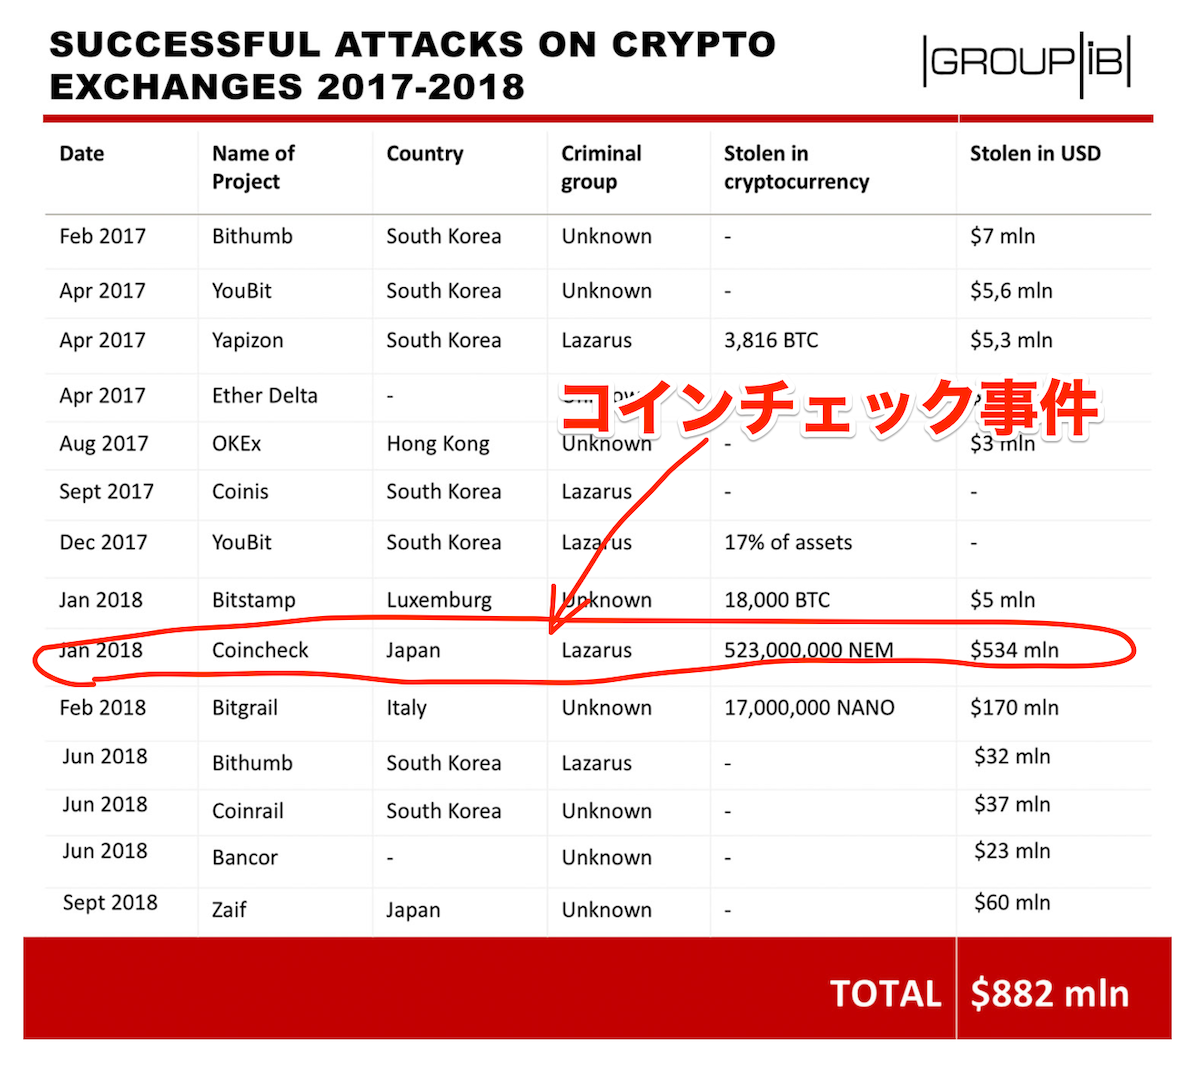 SUCCESSFUL ATTACKS ON CRYPTO EXCHANGES 2017-2018